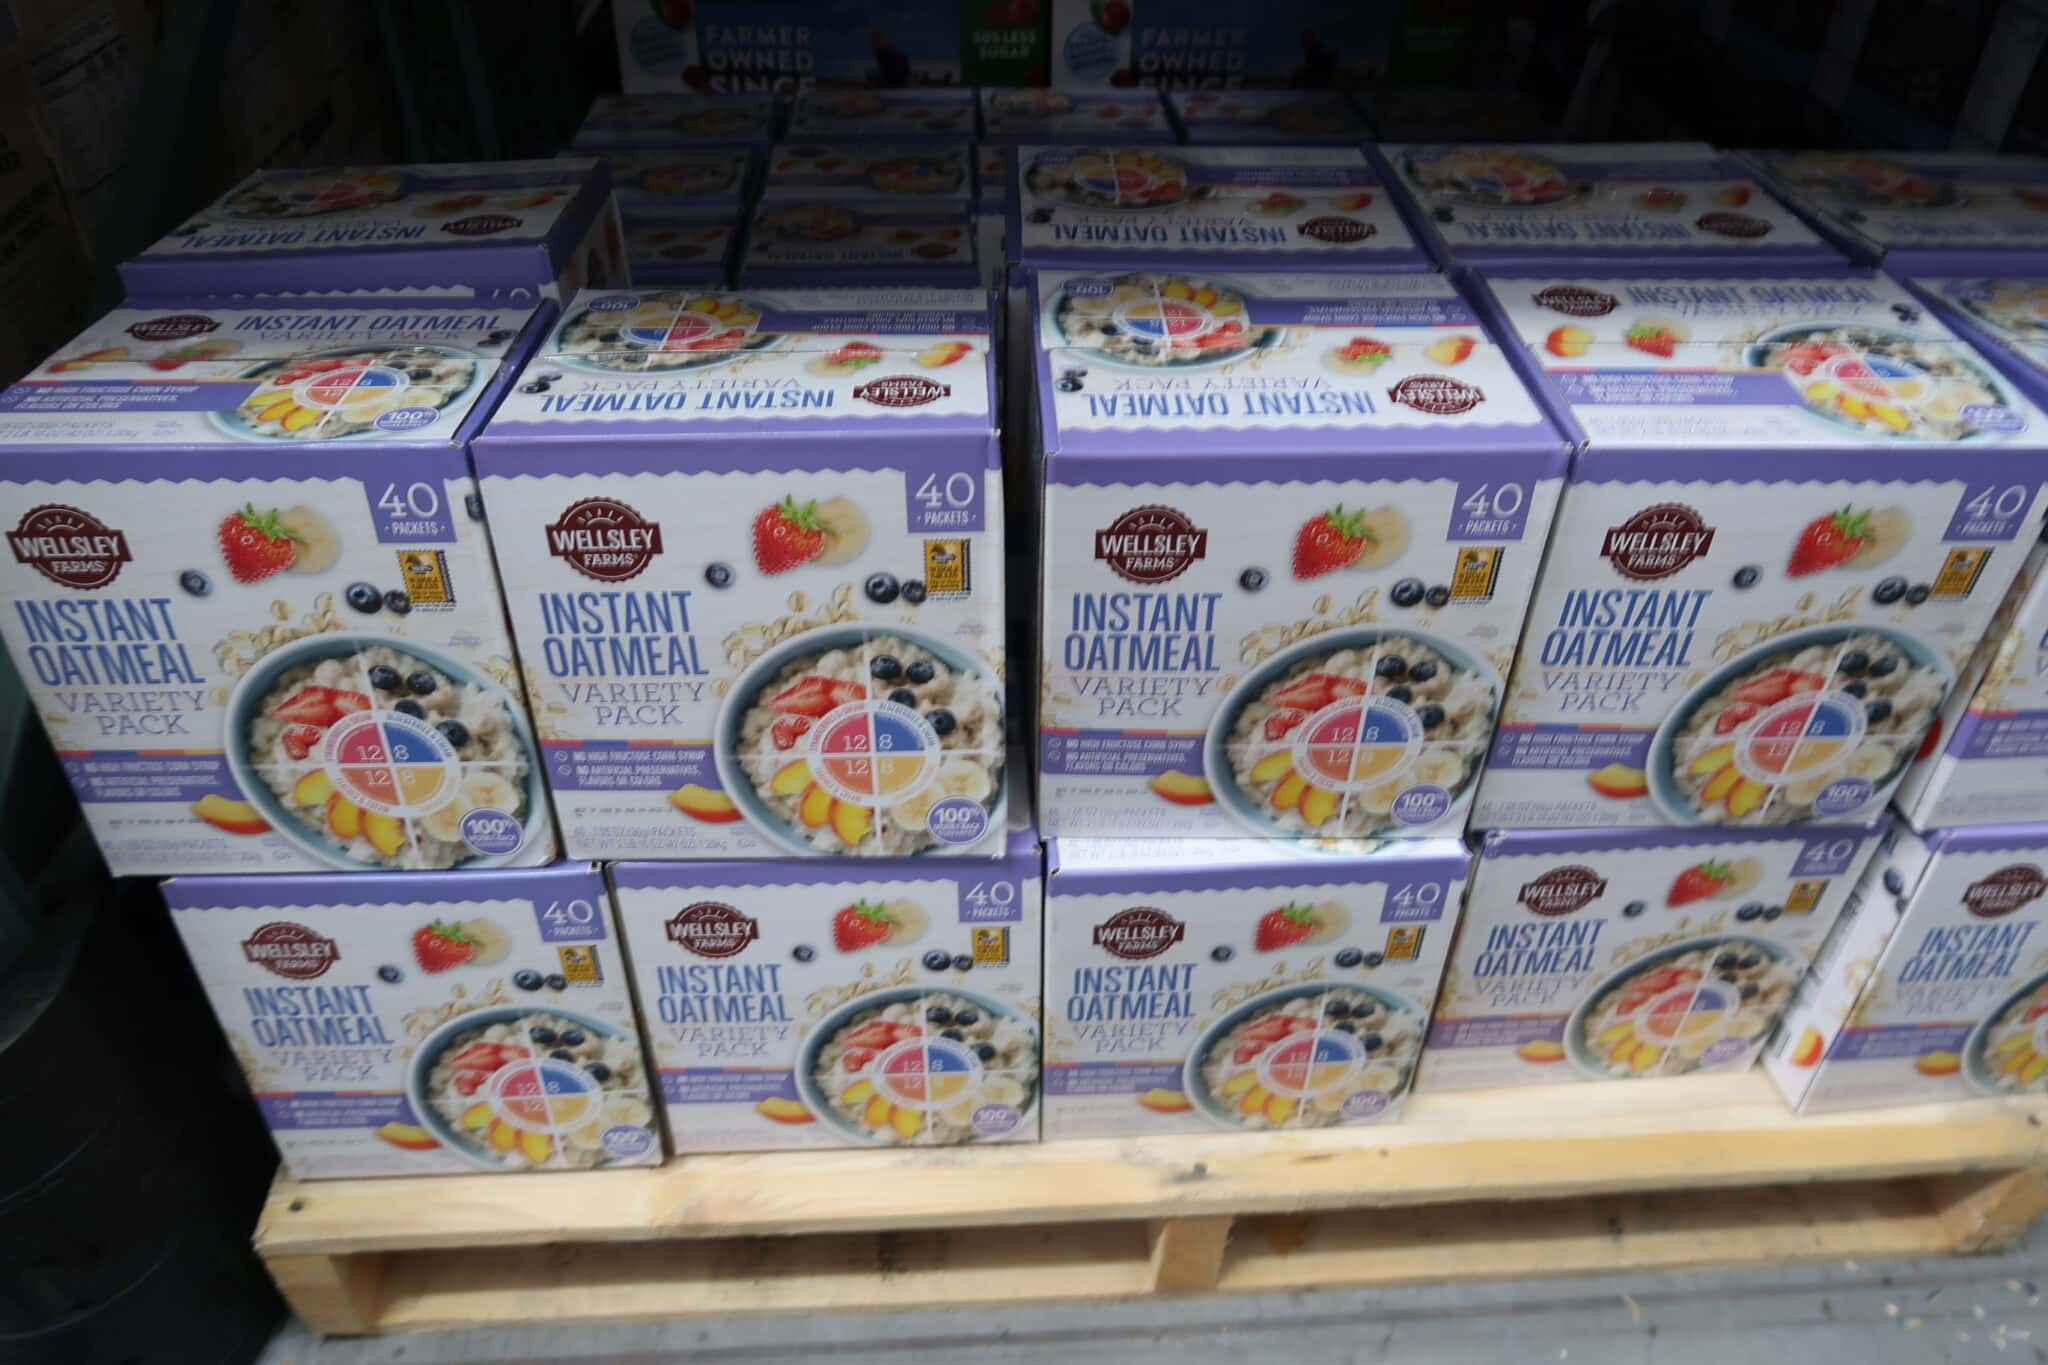 Wellsley Farms Instant Oatmeal Variety Pack $5.99